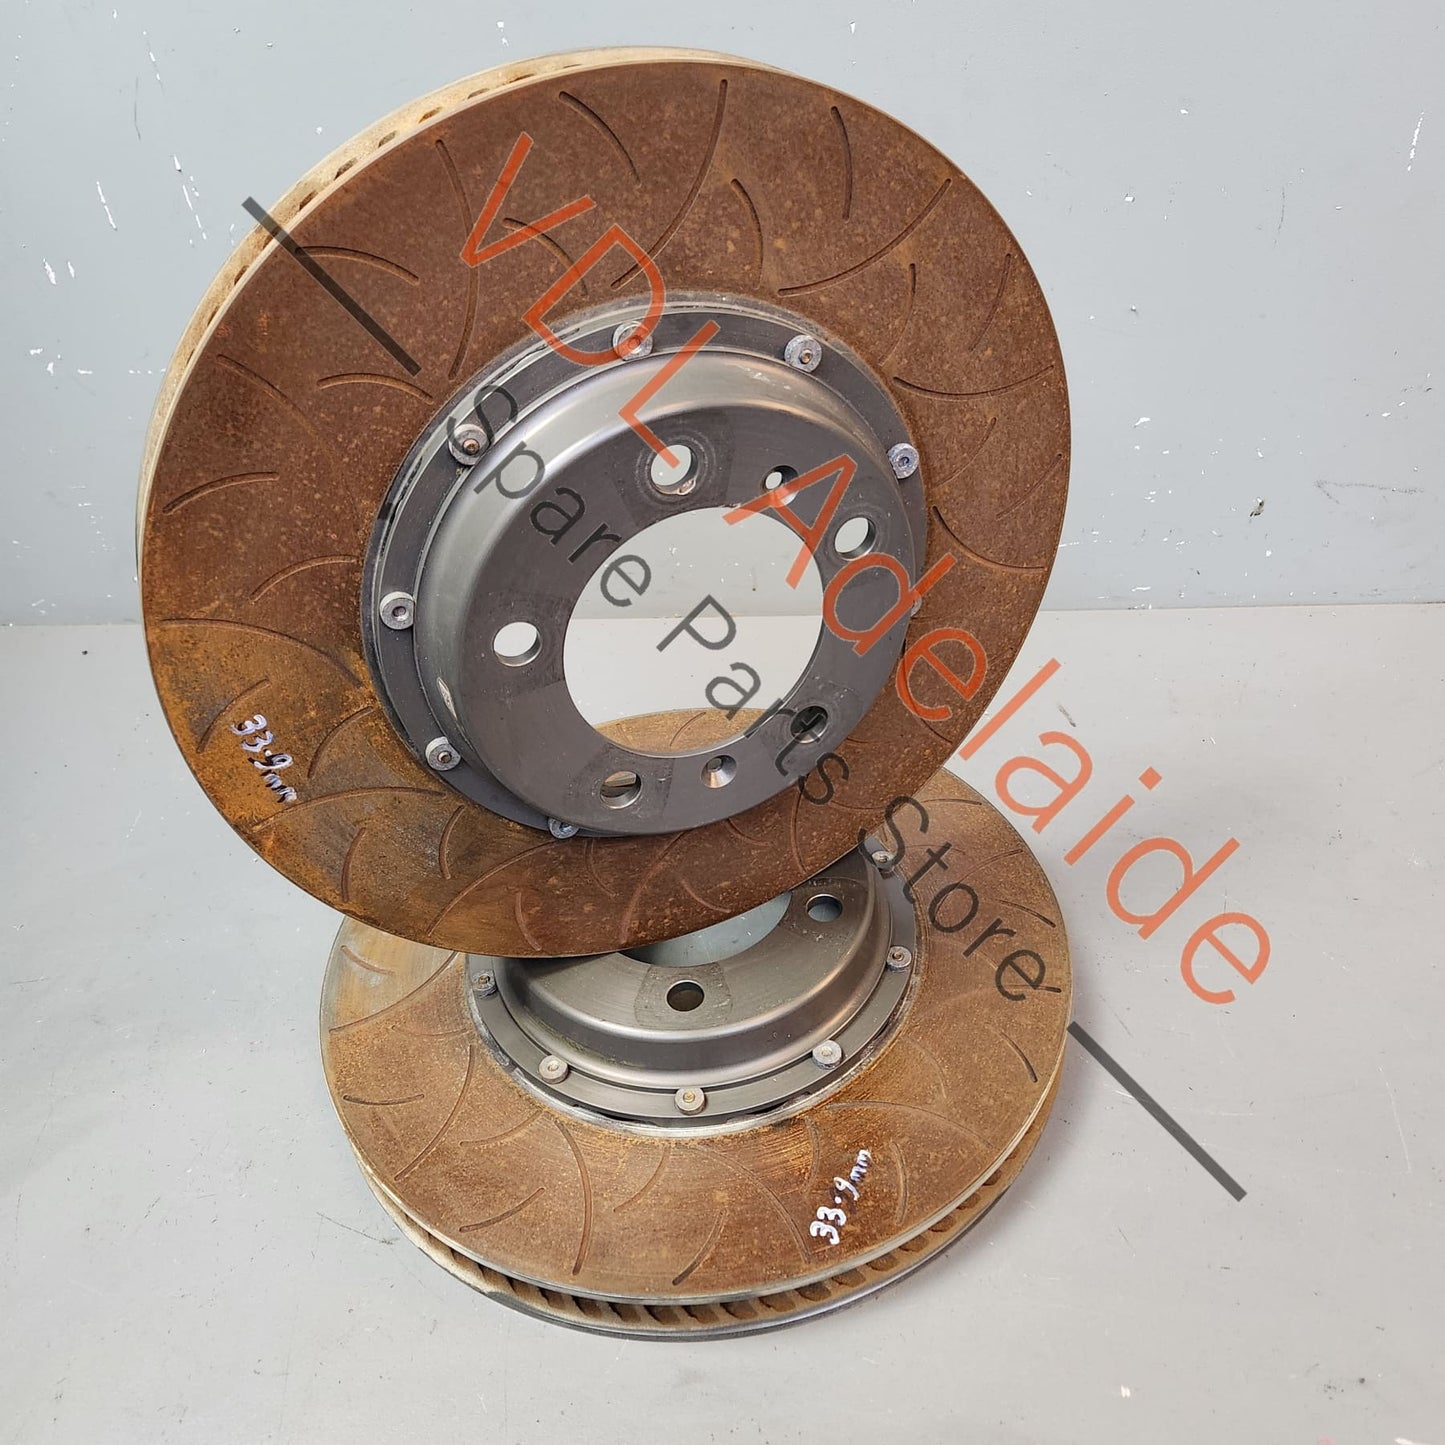 Pair of Brembo Racing 2 Piece Disc Brake Rotors & Hats 350 x 34mm for Iron Conversion from Ceramic PCCB 09930610